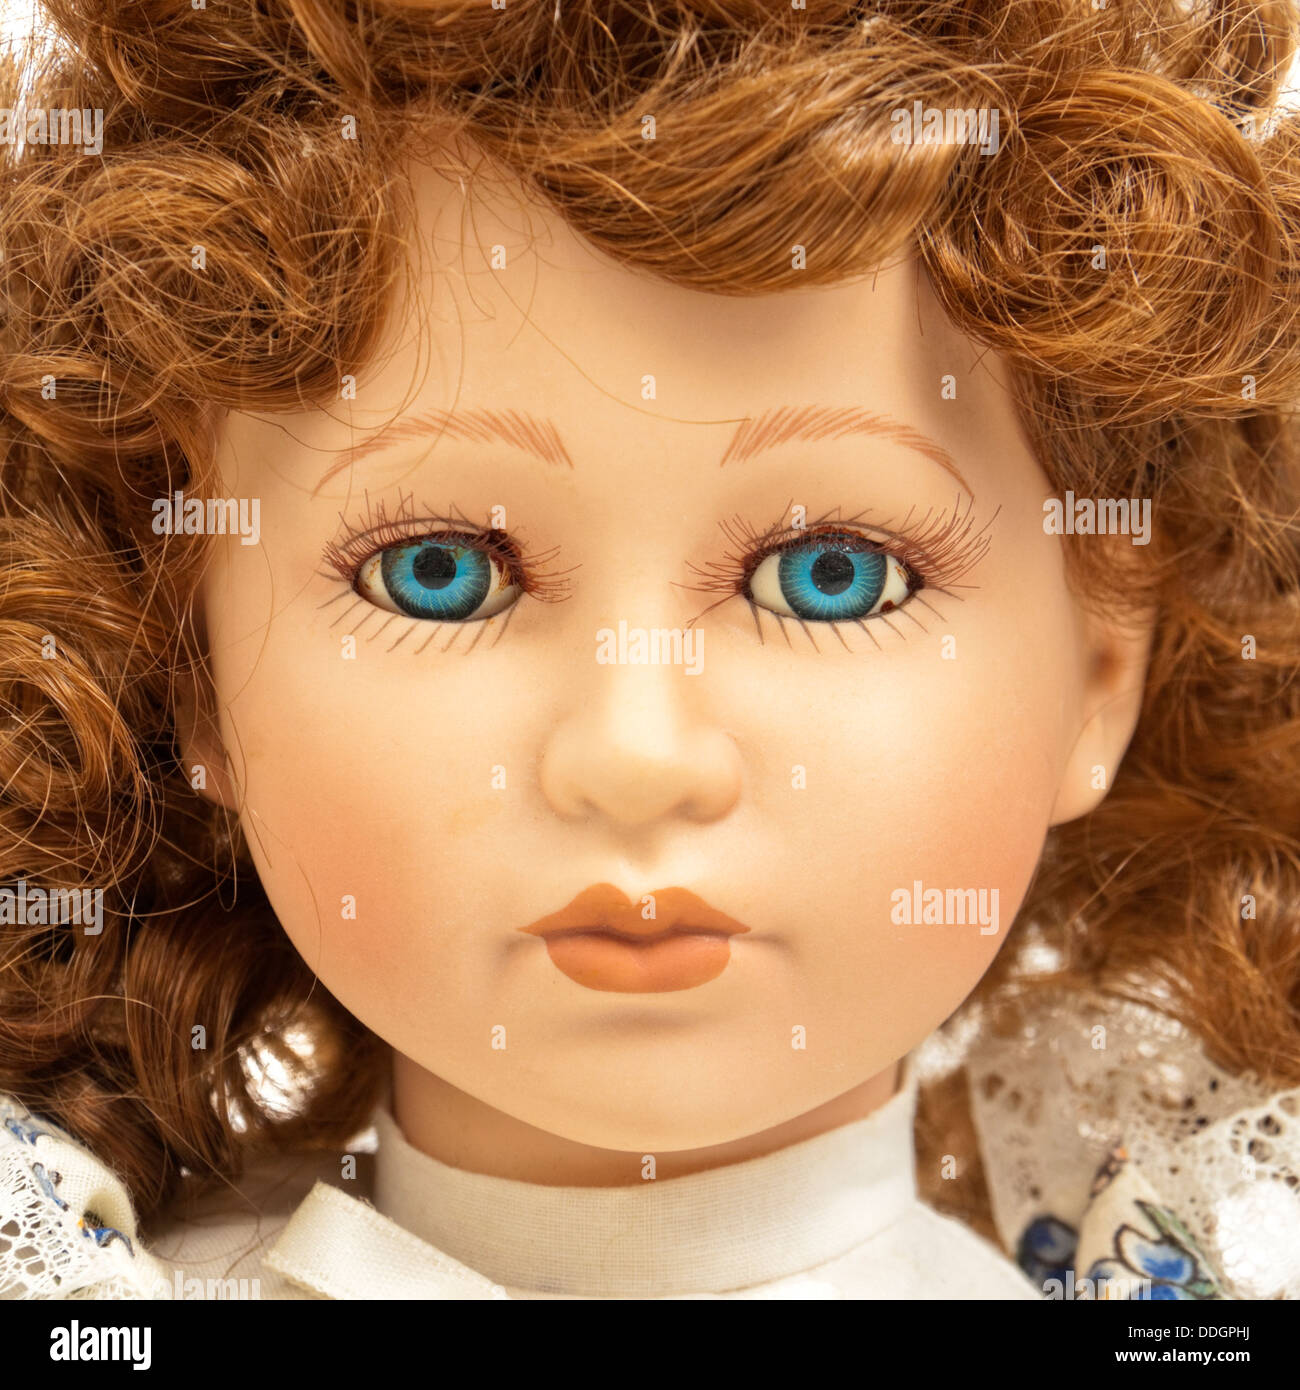 Ethnic Brown Porcelain Baby Doll Head 